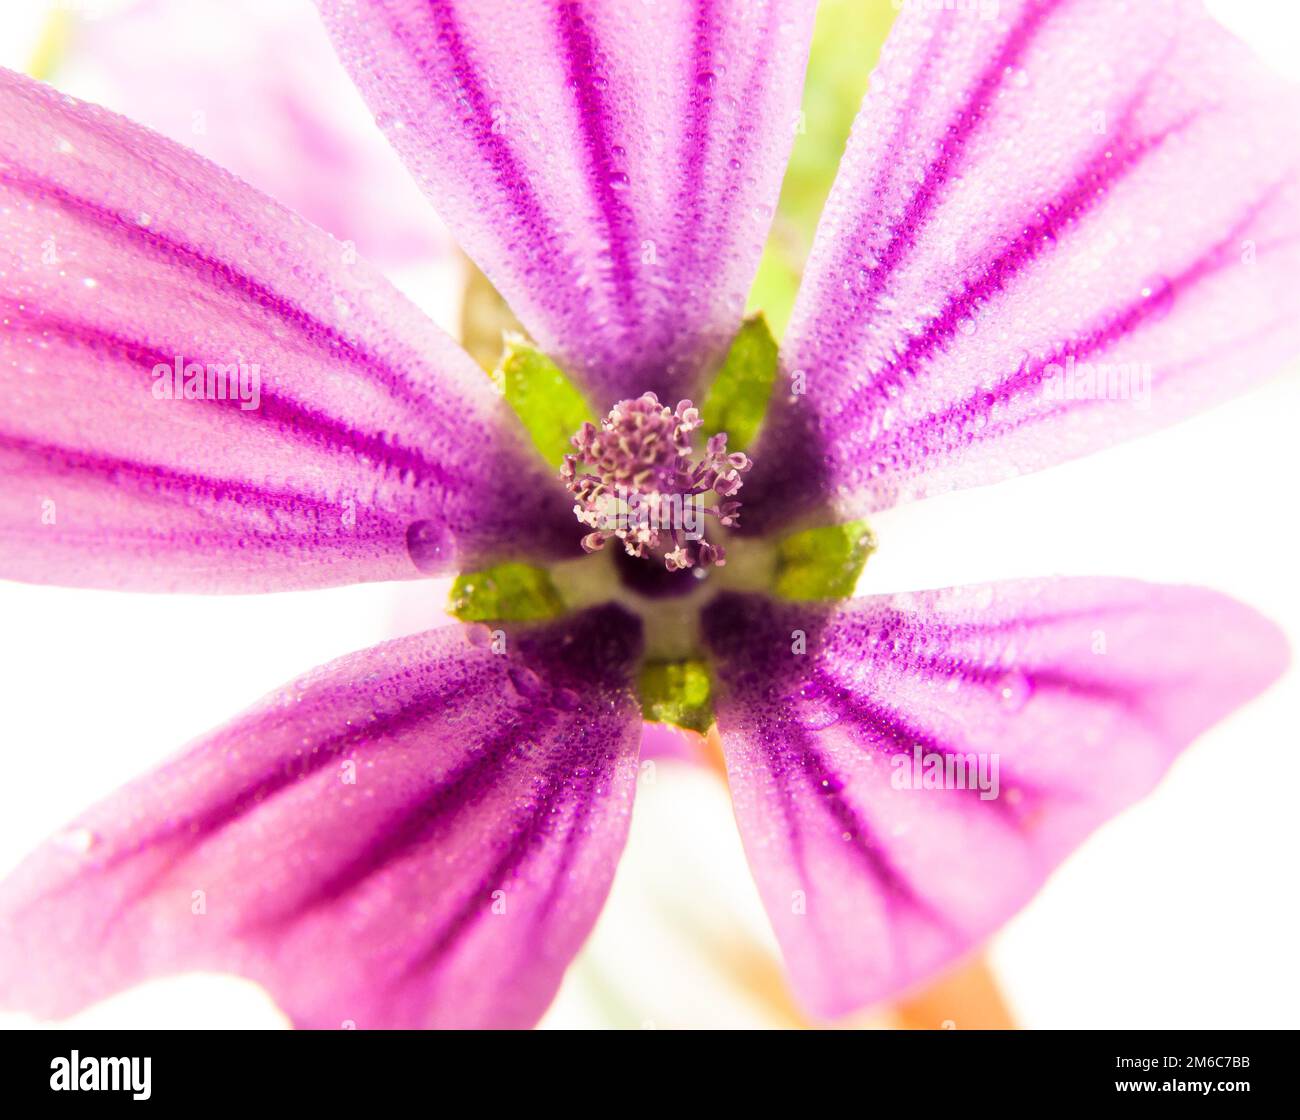 Pink common mallow Malva sylvestris up close on white background with water dew droplets Stock Photo